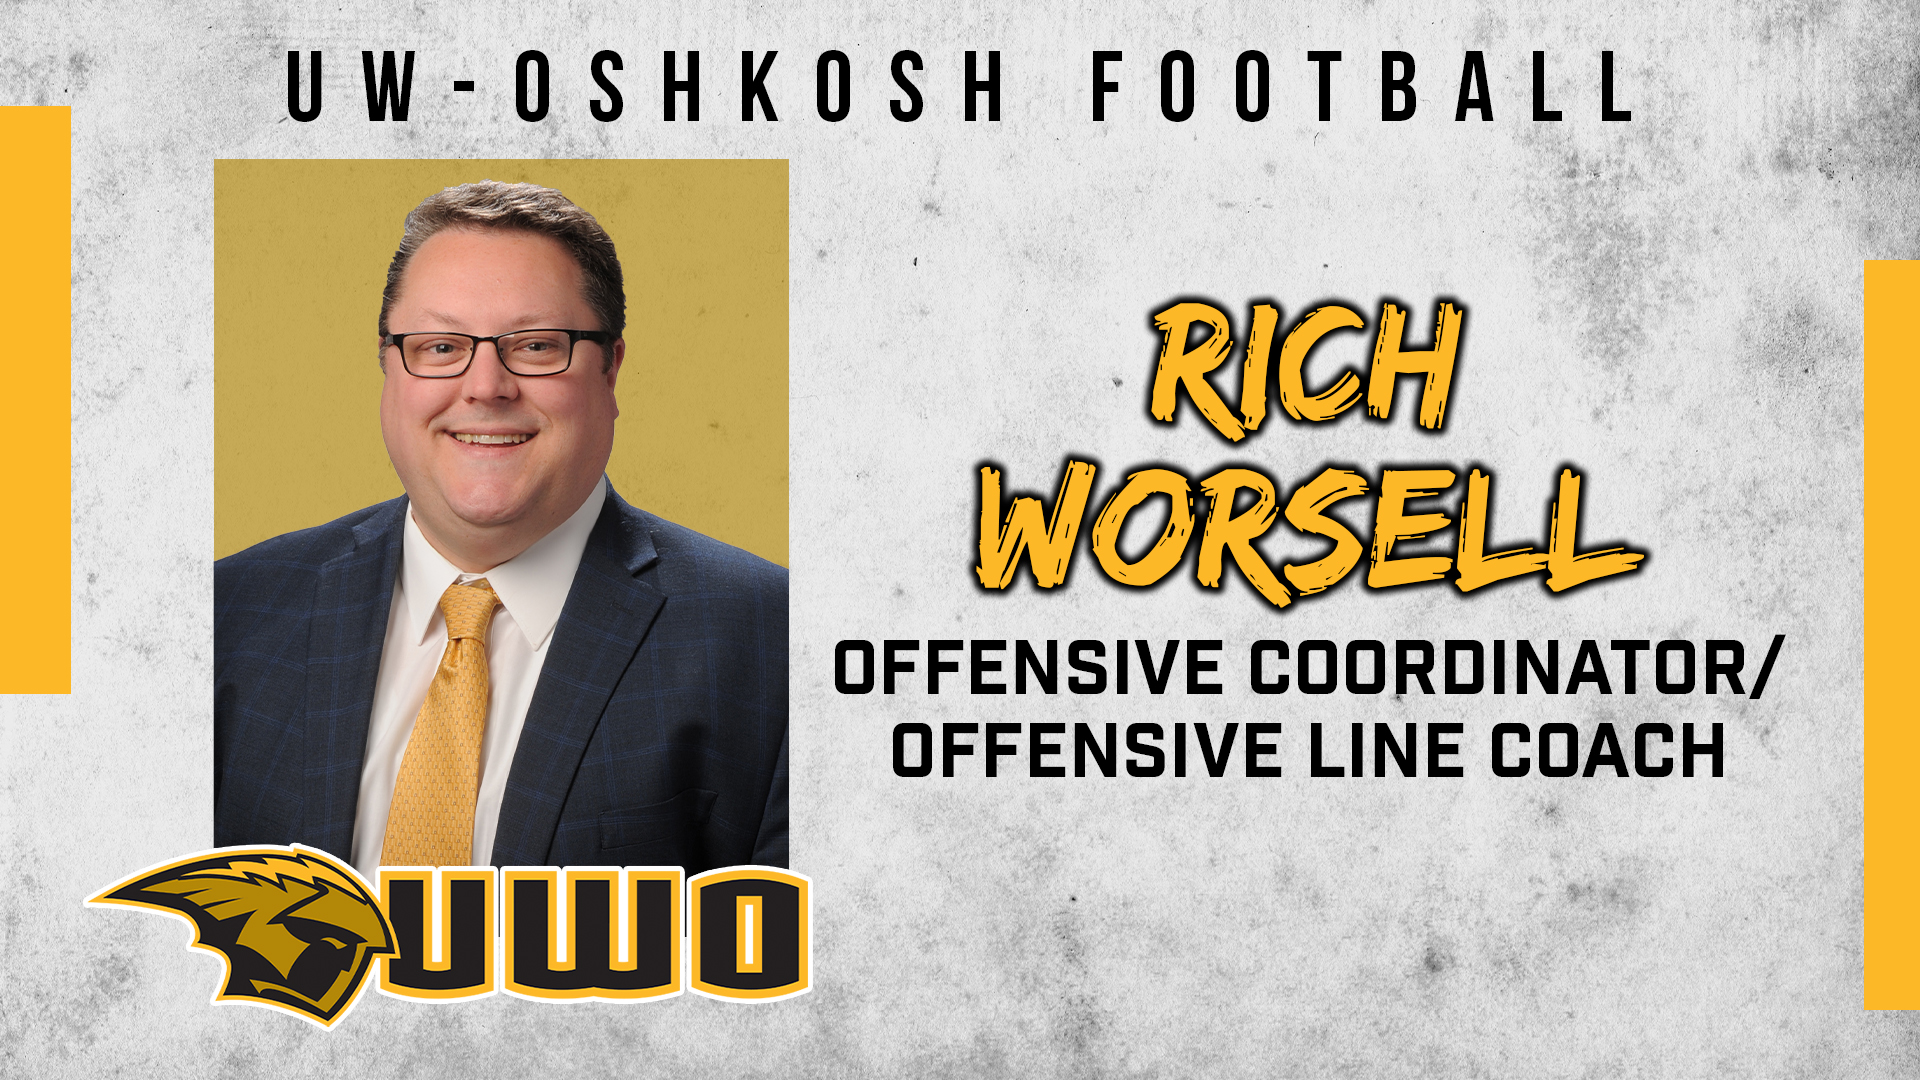 Worsell Named Football Offensive Coordinator